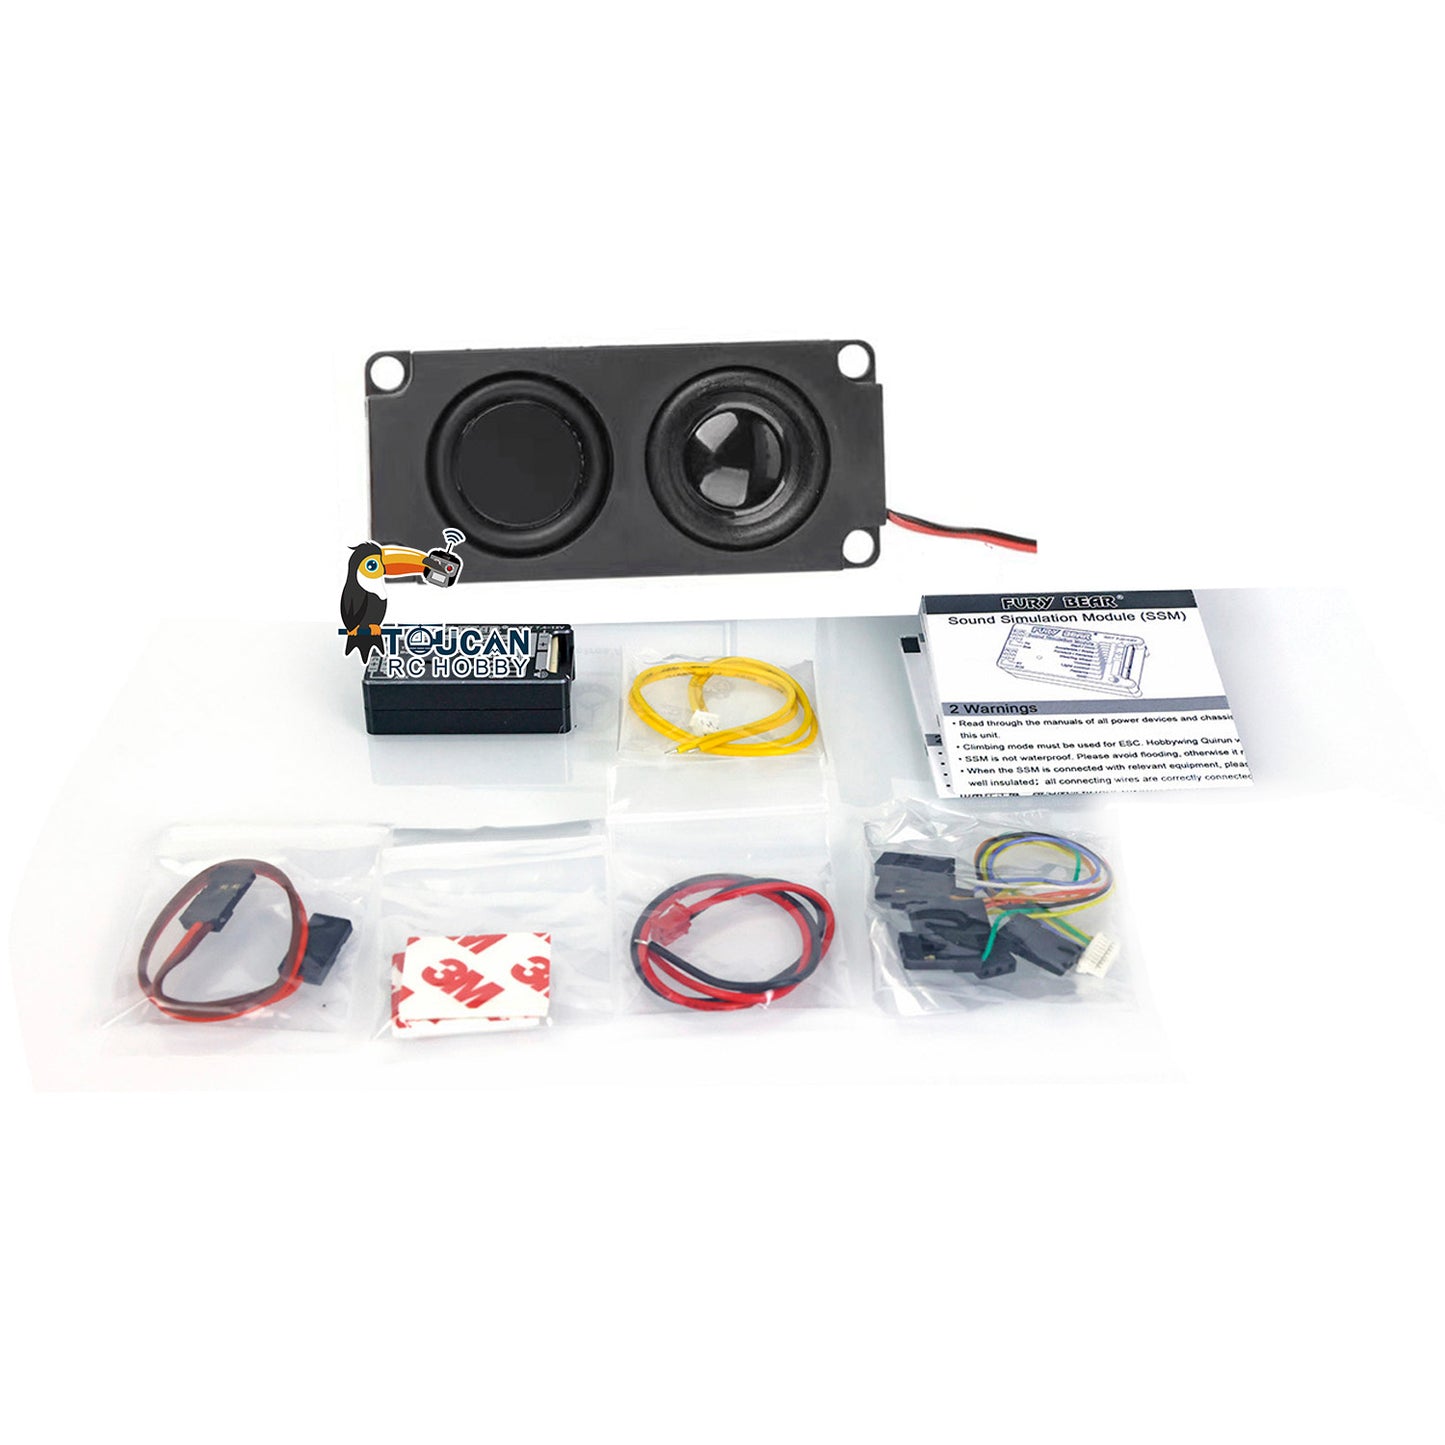 Sound System Spare Part DIY for 1/14 LESU Radio Control Tractor Truck R730 EURO6 FH750 Hobby Model 43x24x13.5mm